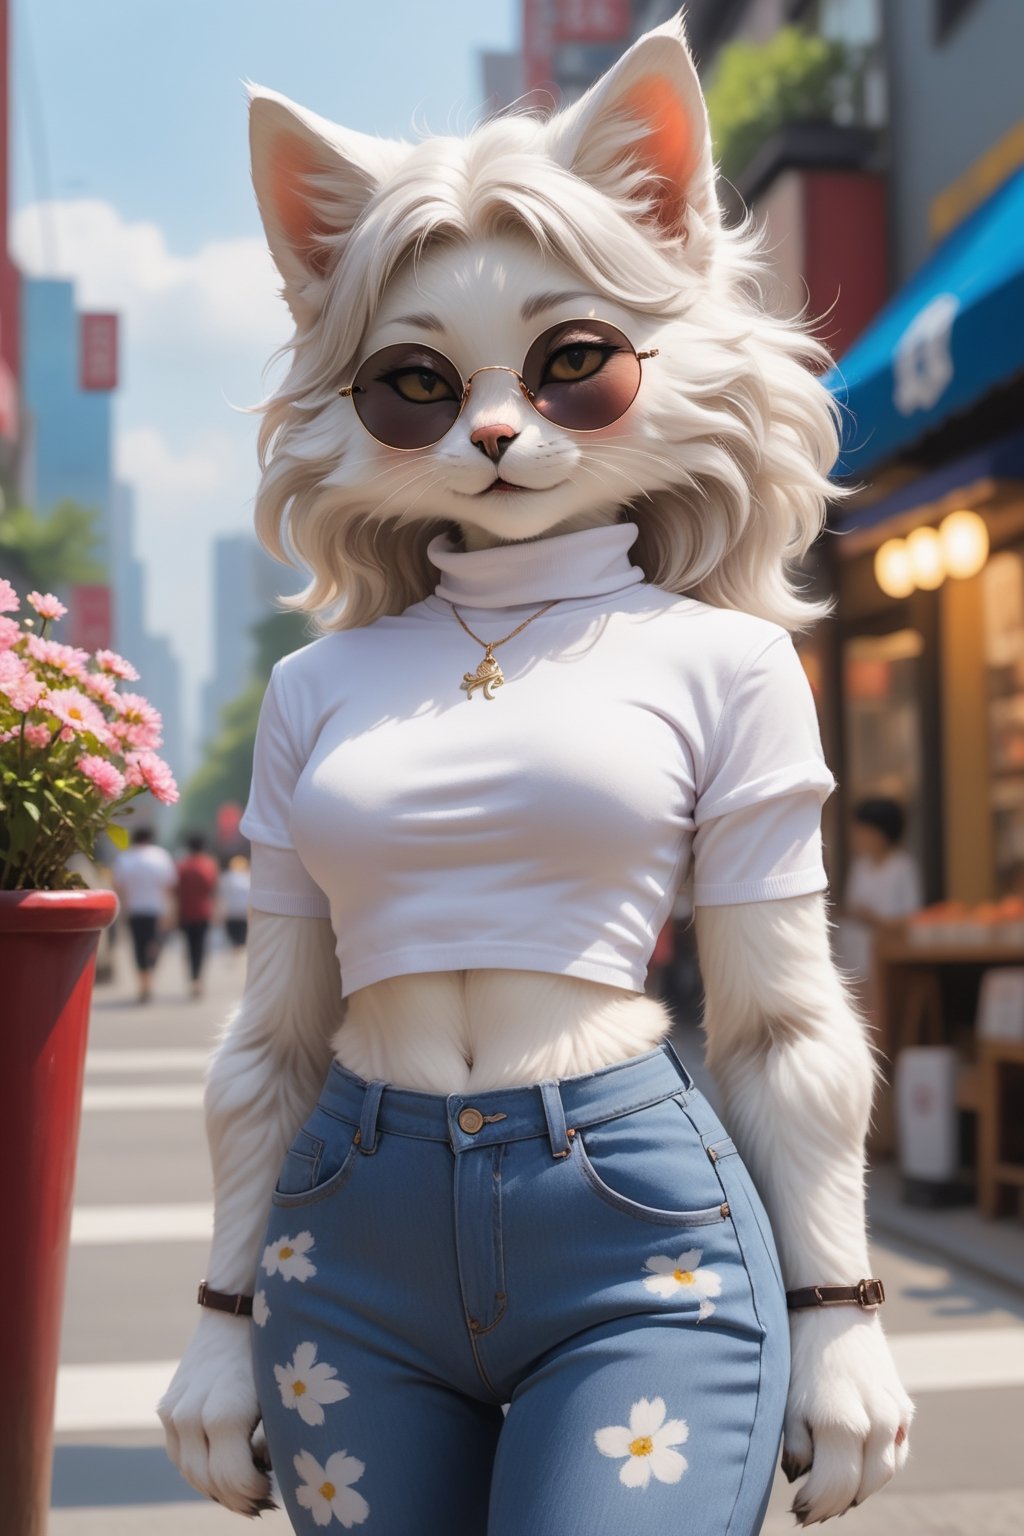 In this summer morning, I saw this model cat named Xiao Hua, smartly across the street, fashion sense is full! Paired with a crisp white T-shirt and trendy jeans and a pair of sunglasses, the whole look can't be taken away. Popular elements interwoven out of the trend style, small flowers is simply the city's most beautiful scenery line! 🕶️👖,Jiezuo, best quality, 32k resolution,A cute cat that walks upright like a human,Lovely Mimi, real photos,WhiteWolf,Detailed background,WhiteWolf,Real hair details, real hair,WhiteWolf,turtleneck crop top,Coat, abdominal muscles,Real hair,Real hair,Cats, cats that have always been like humans.,Xxmix_Catecat